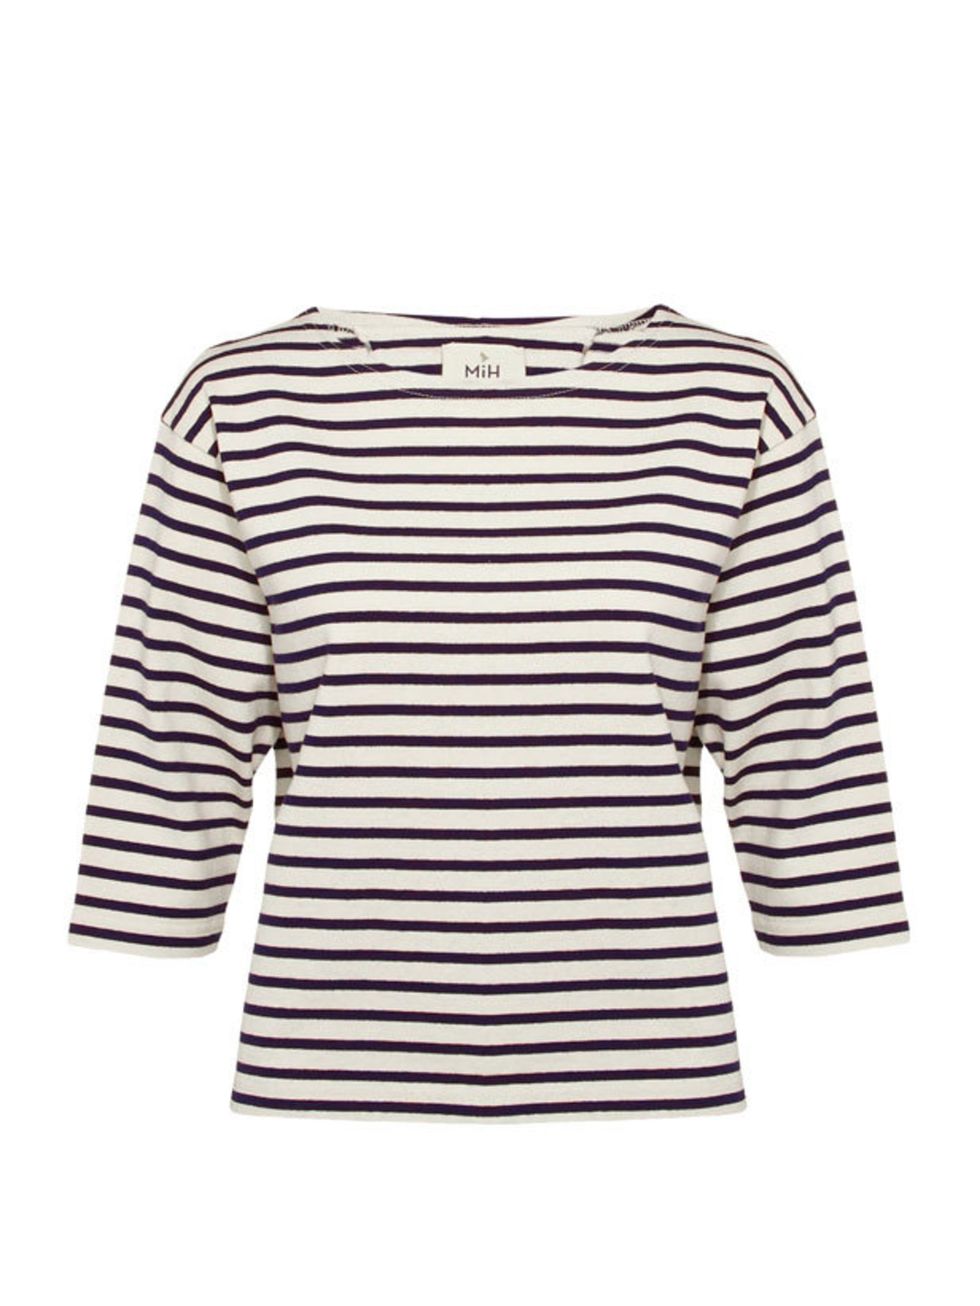 <p>Whether youre cosying up on the sofa or teaming it with a pair of leather skinnies for drinks with the girls, you cant go wrong with a Breton top MiH stripe sweater, £139, at <a href="http://www.harrods.com/product/mih/breton-top/000000000002694565?